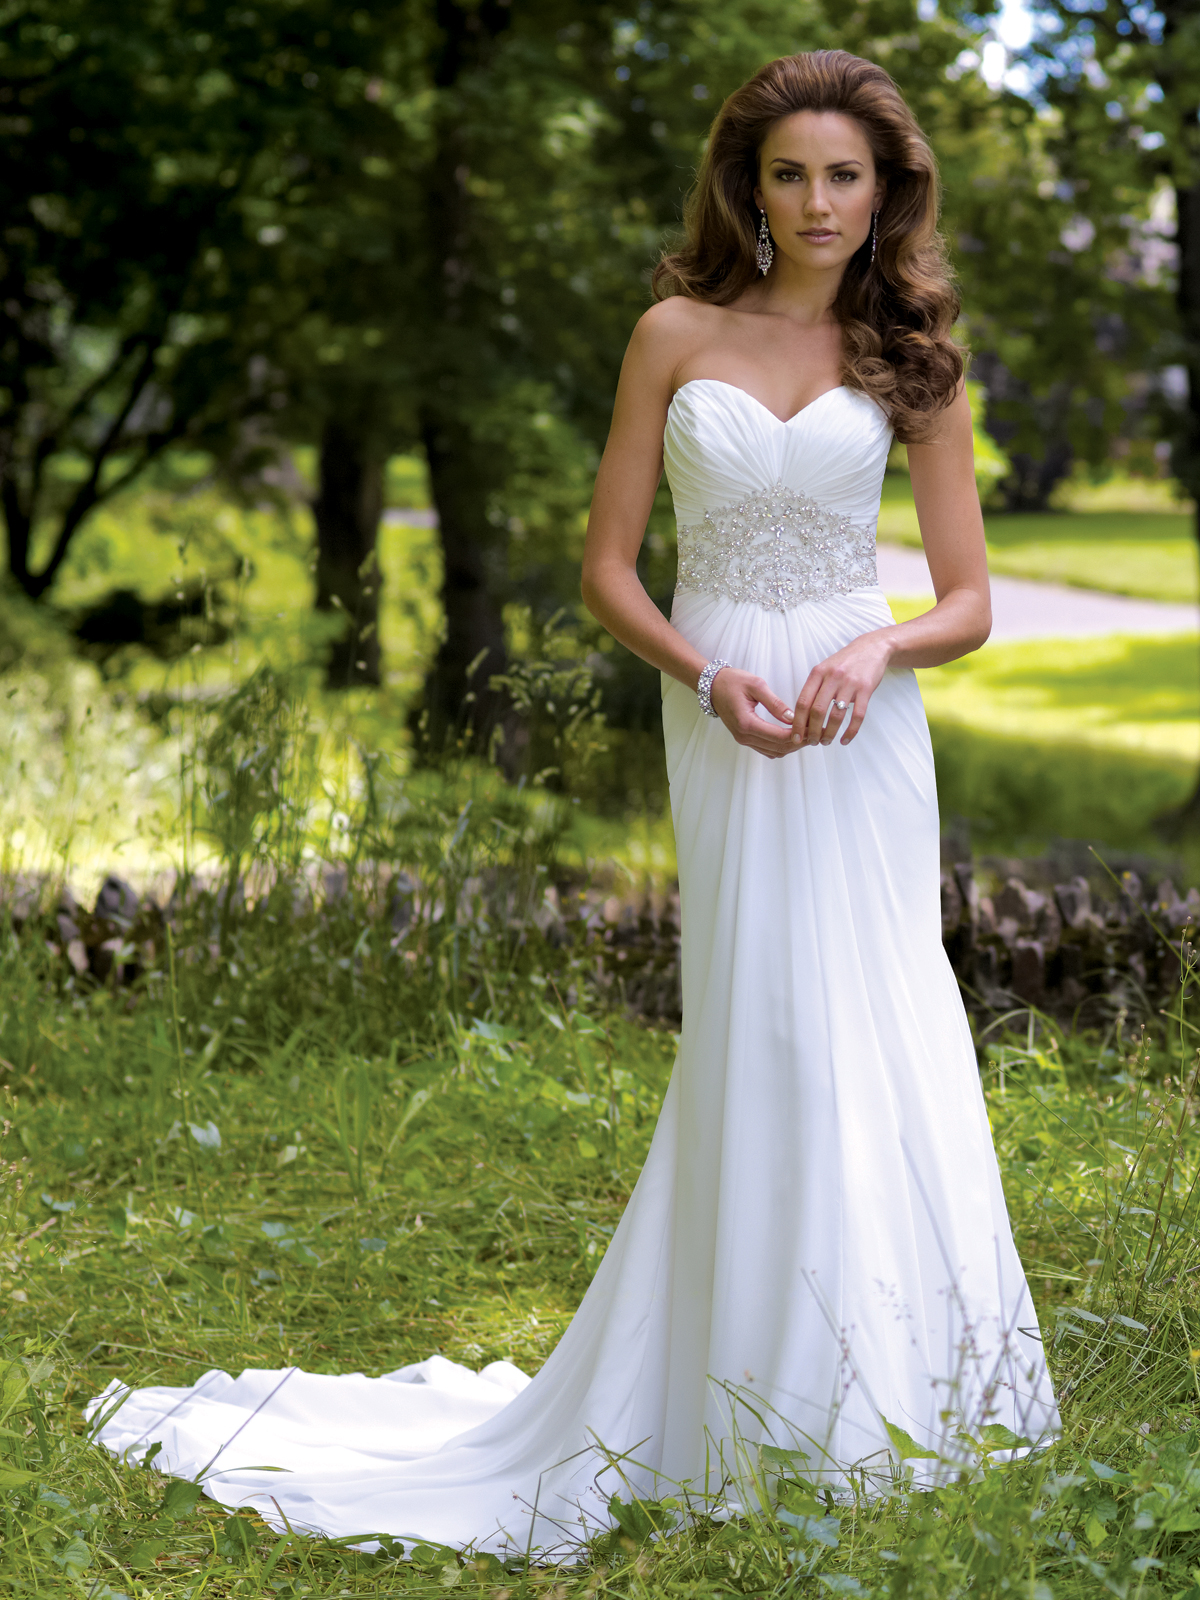 Casual wedding dress with lace details